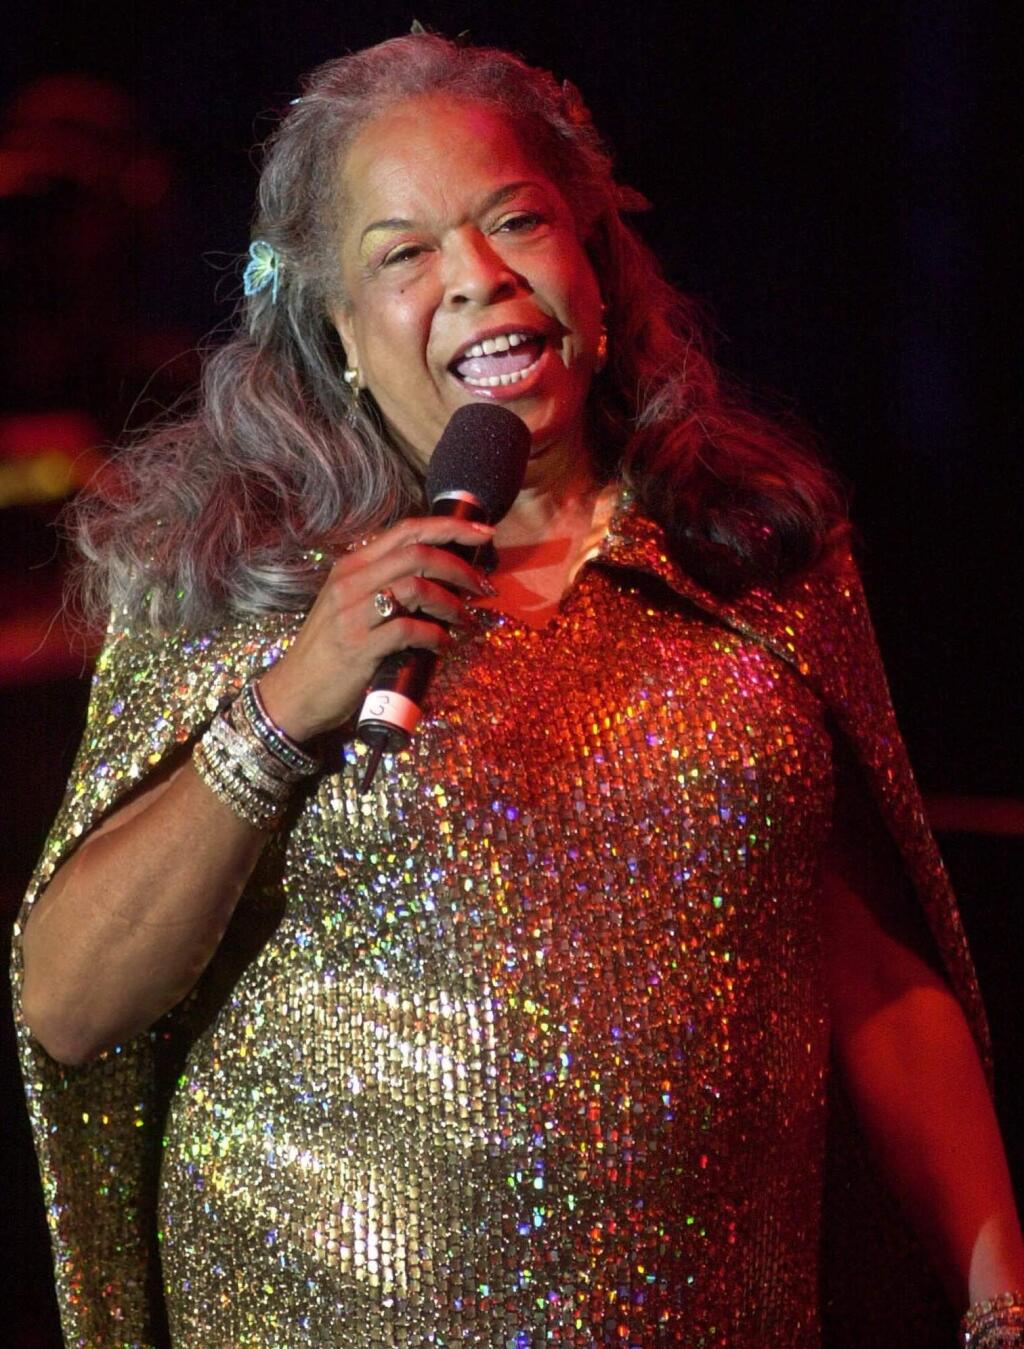 FILE - In this July 20, 2001 file photo, Della Reese sings during the Detroit 300 festival in Detroit. Reese, the actress and gospel-influenced singer who in middle age found her greatest fame as Tess, the wise angel in the long-running television drama 'Touched by an Angel,' died at age 86. A family representative released a statement Monday that Reese died peacefully Sunday, Nov. 19, 2017, in California. No cause of death or additional details were provided. (AP Photo/Paul Warner, File)